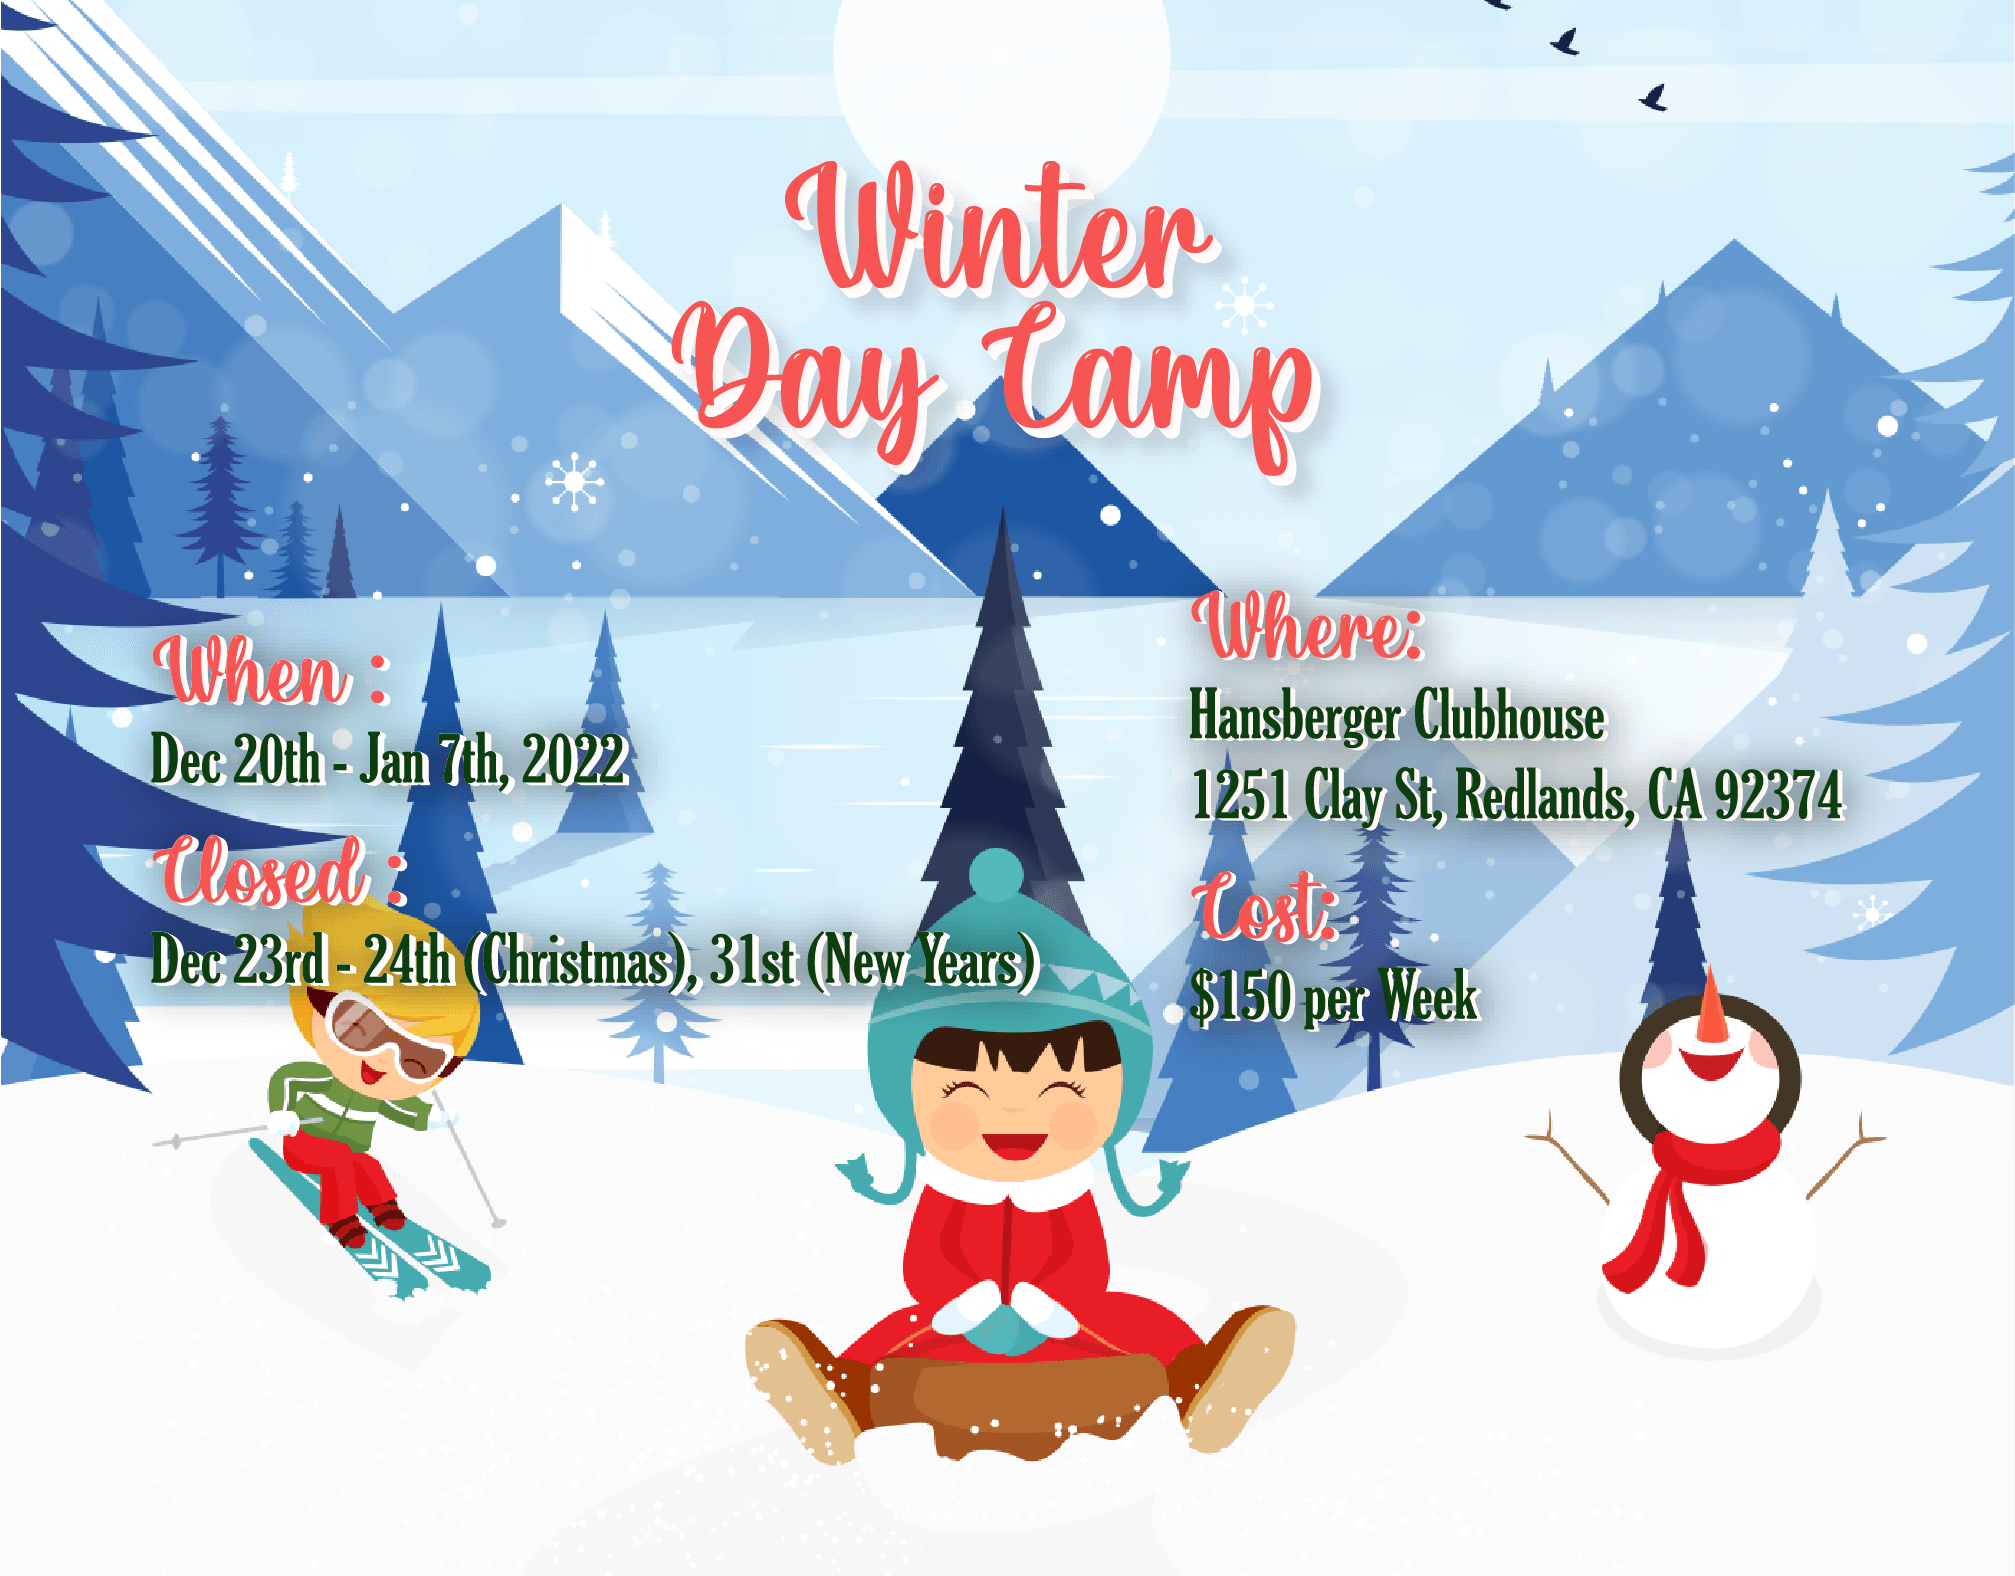 Winter Day Camp